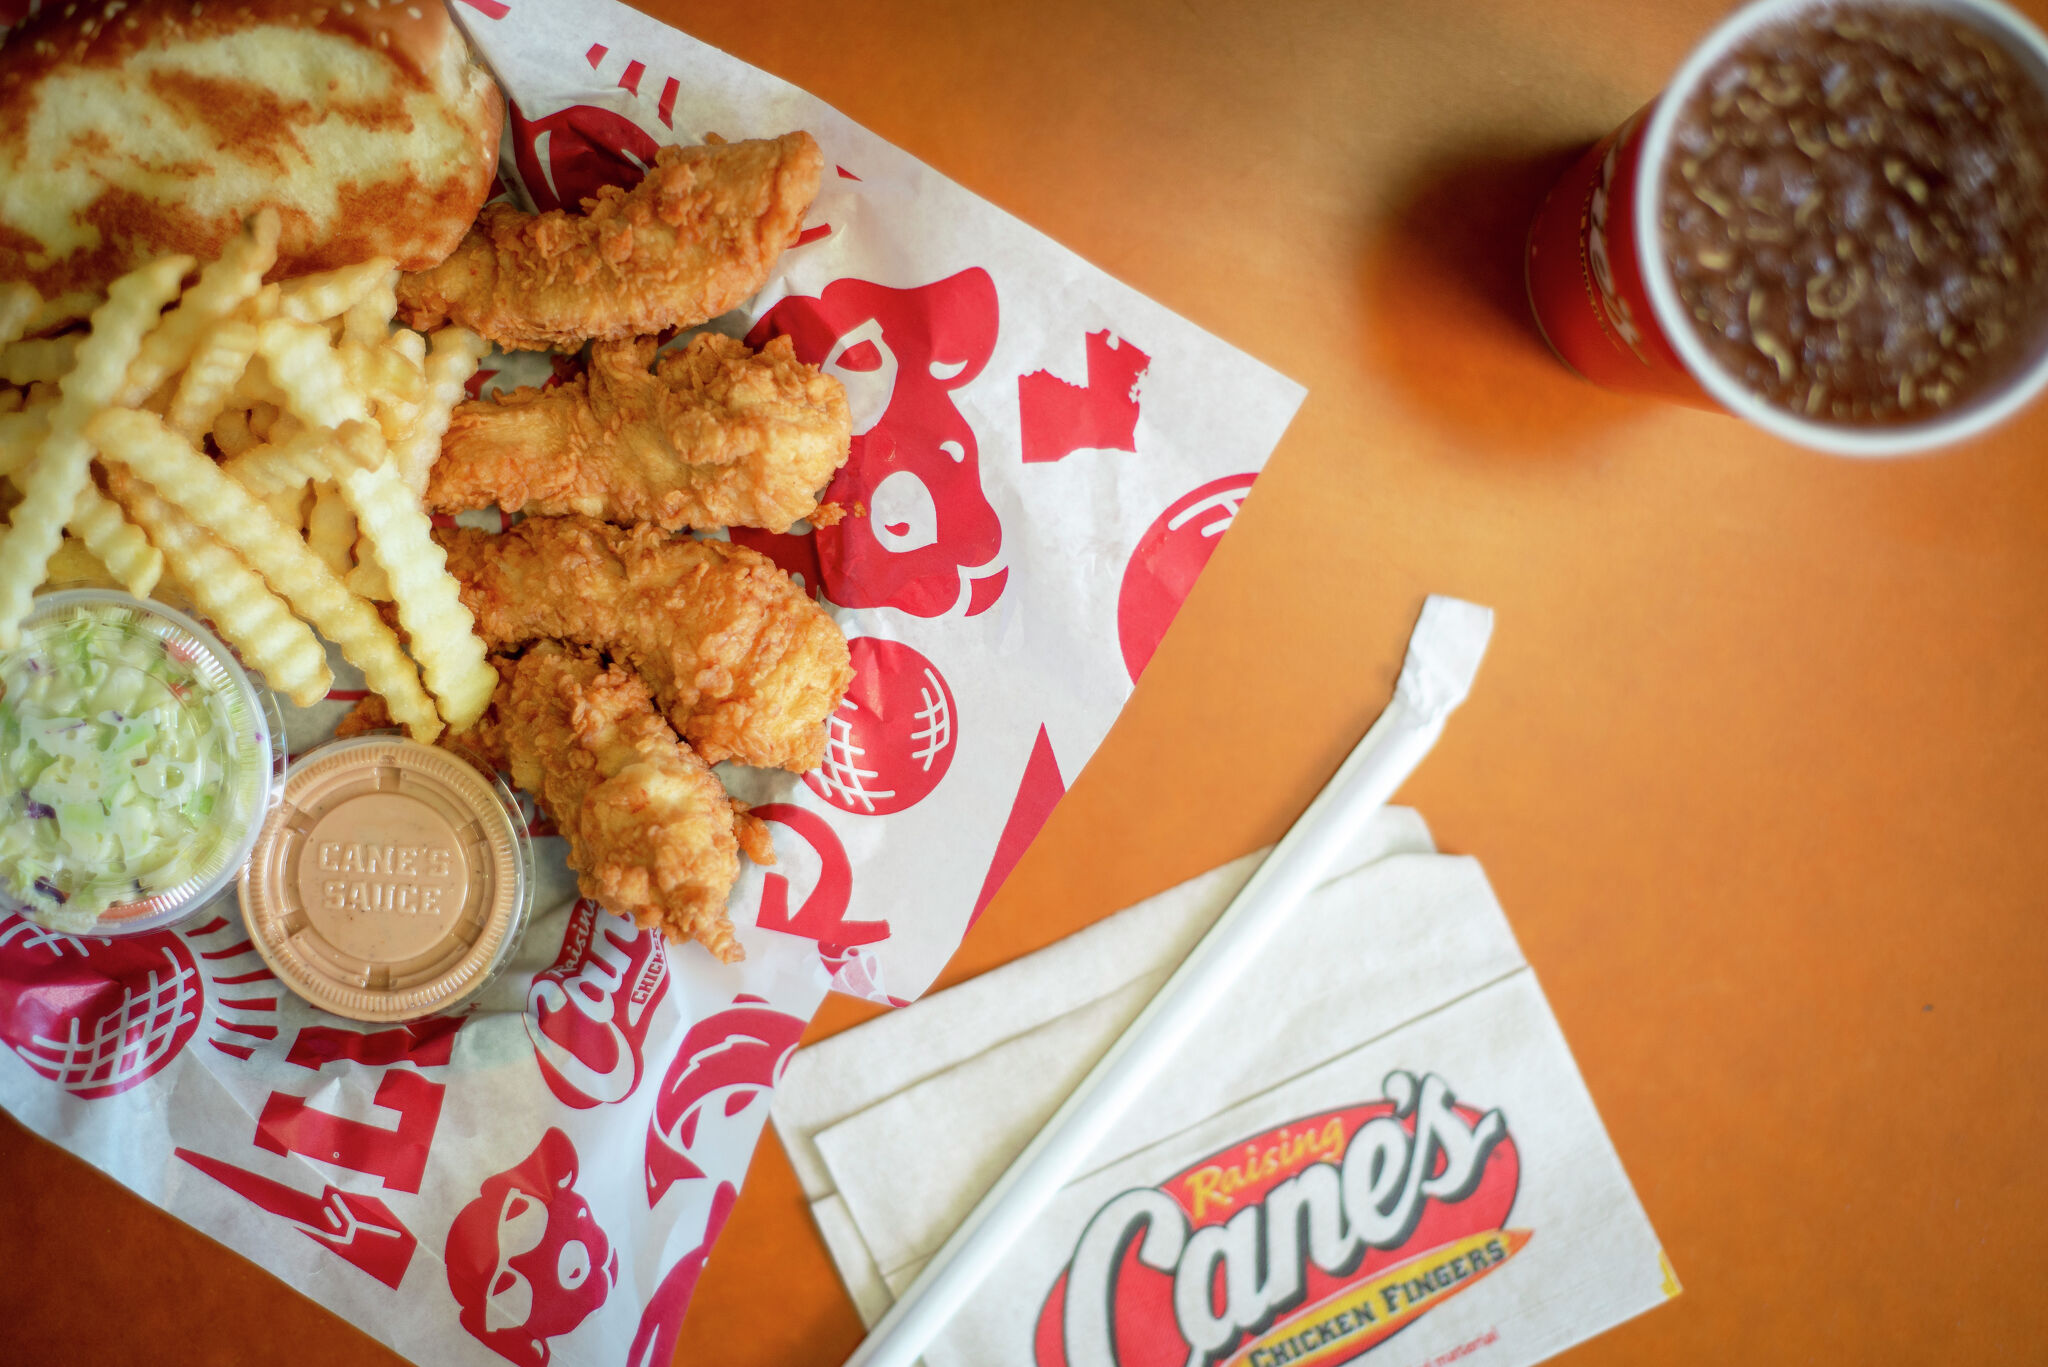 Home Page  Raising Cane's